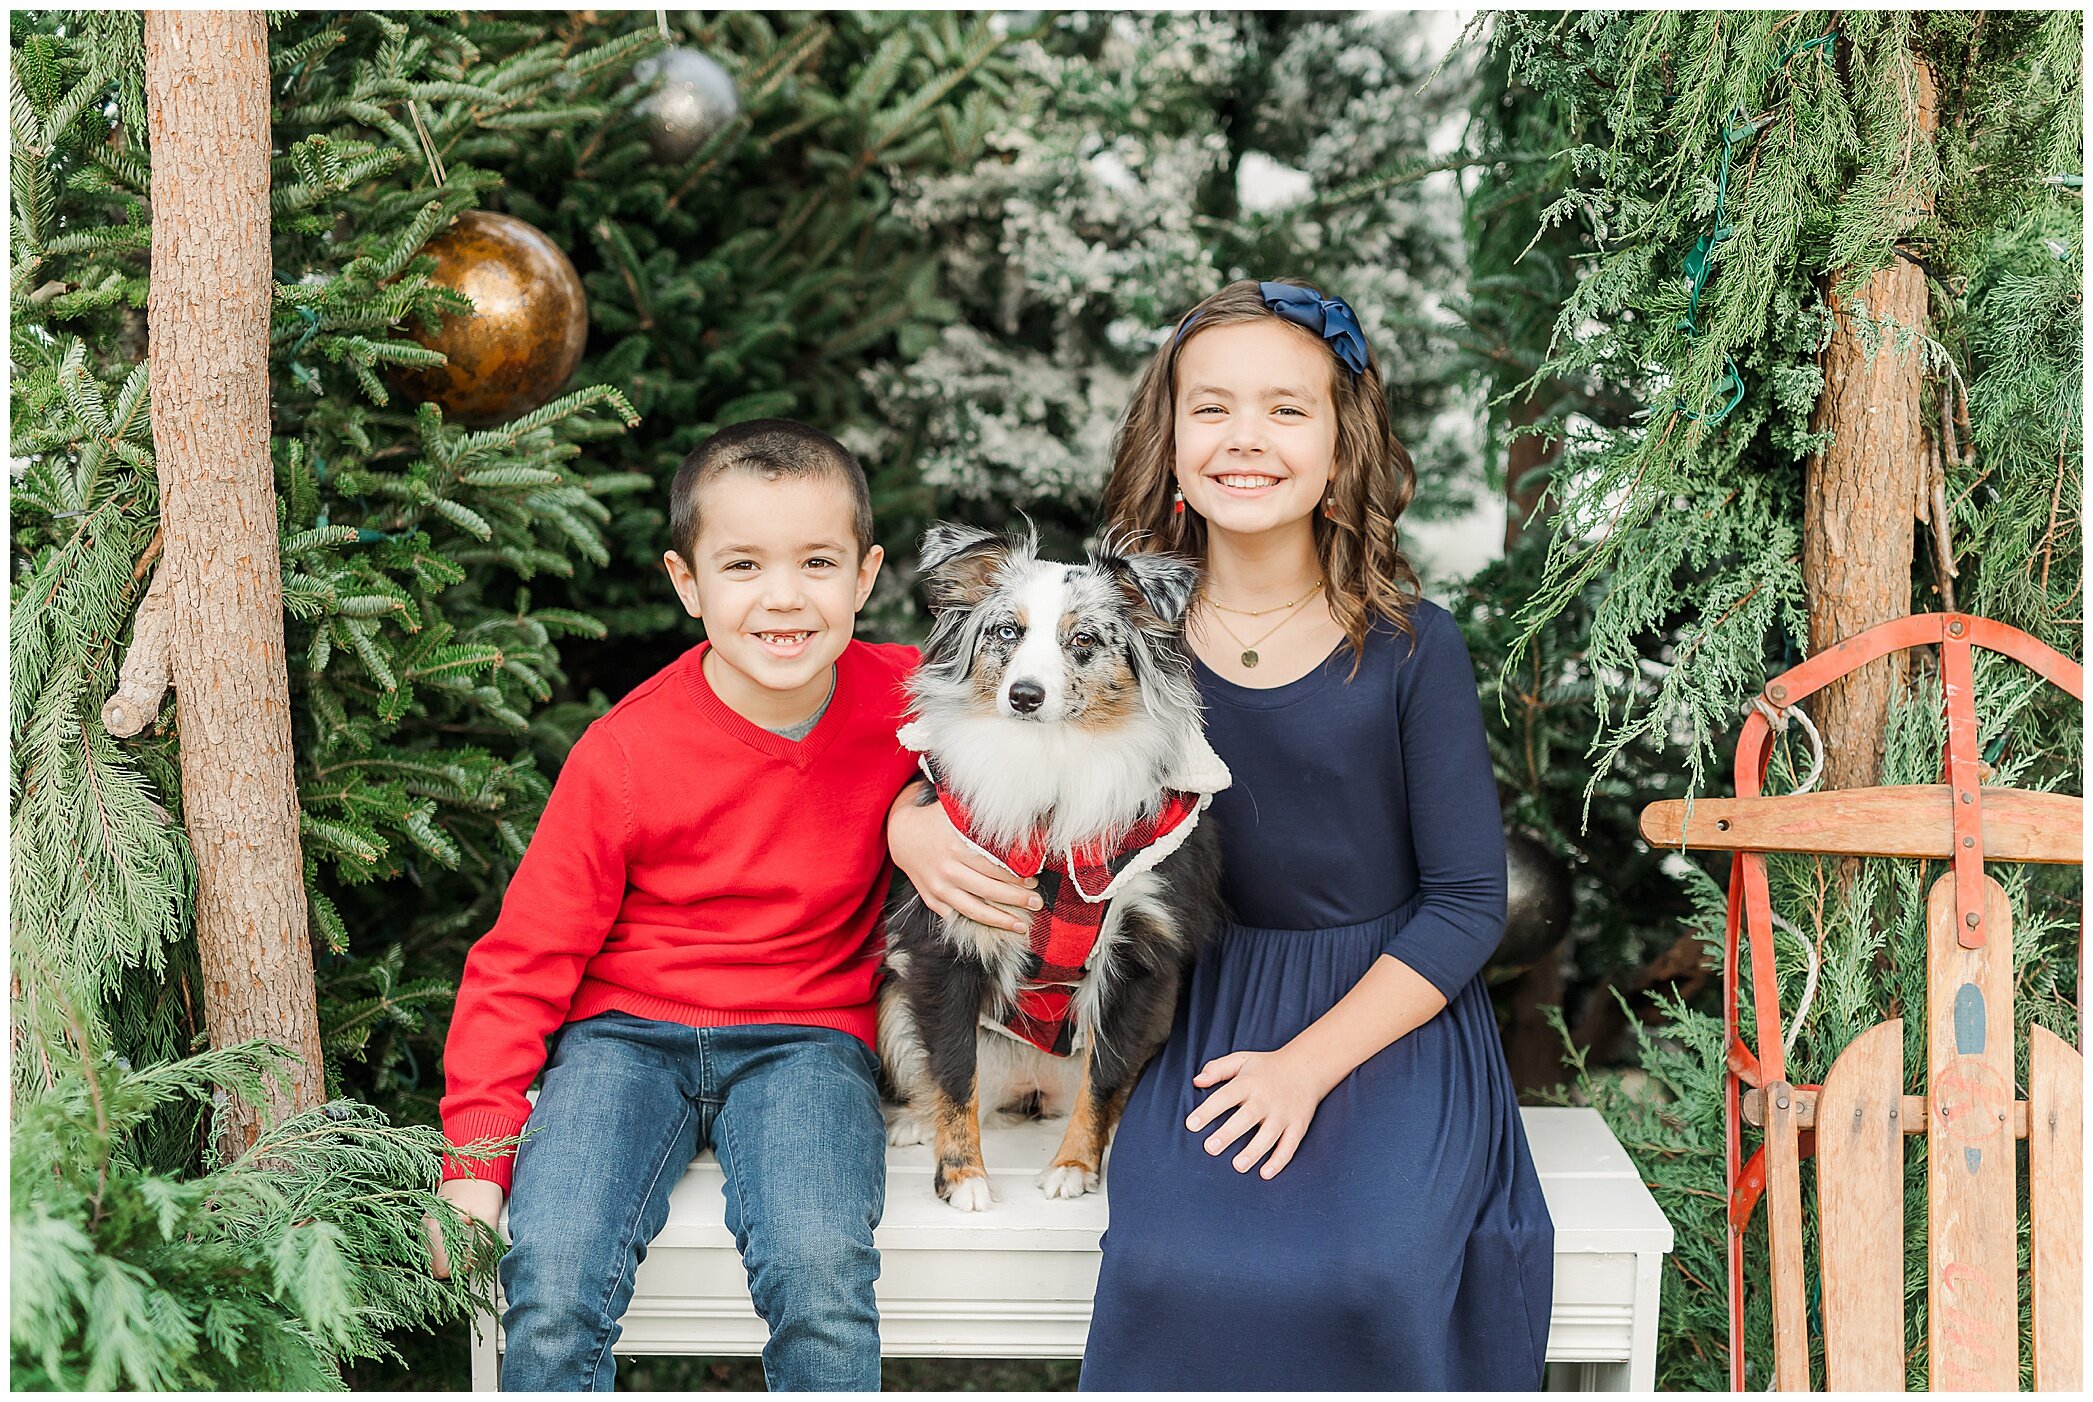 Christmas mini sessions with Ryann Winn Photography at Fleur de Fou with toddlers and dog